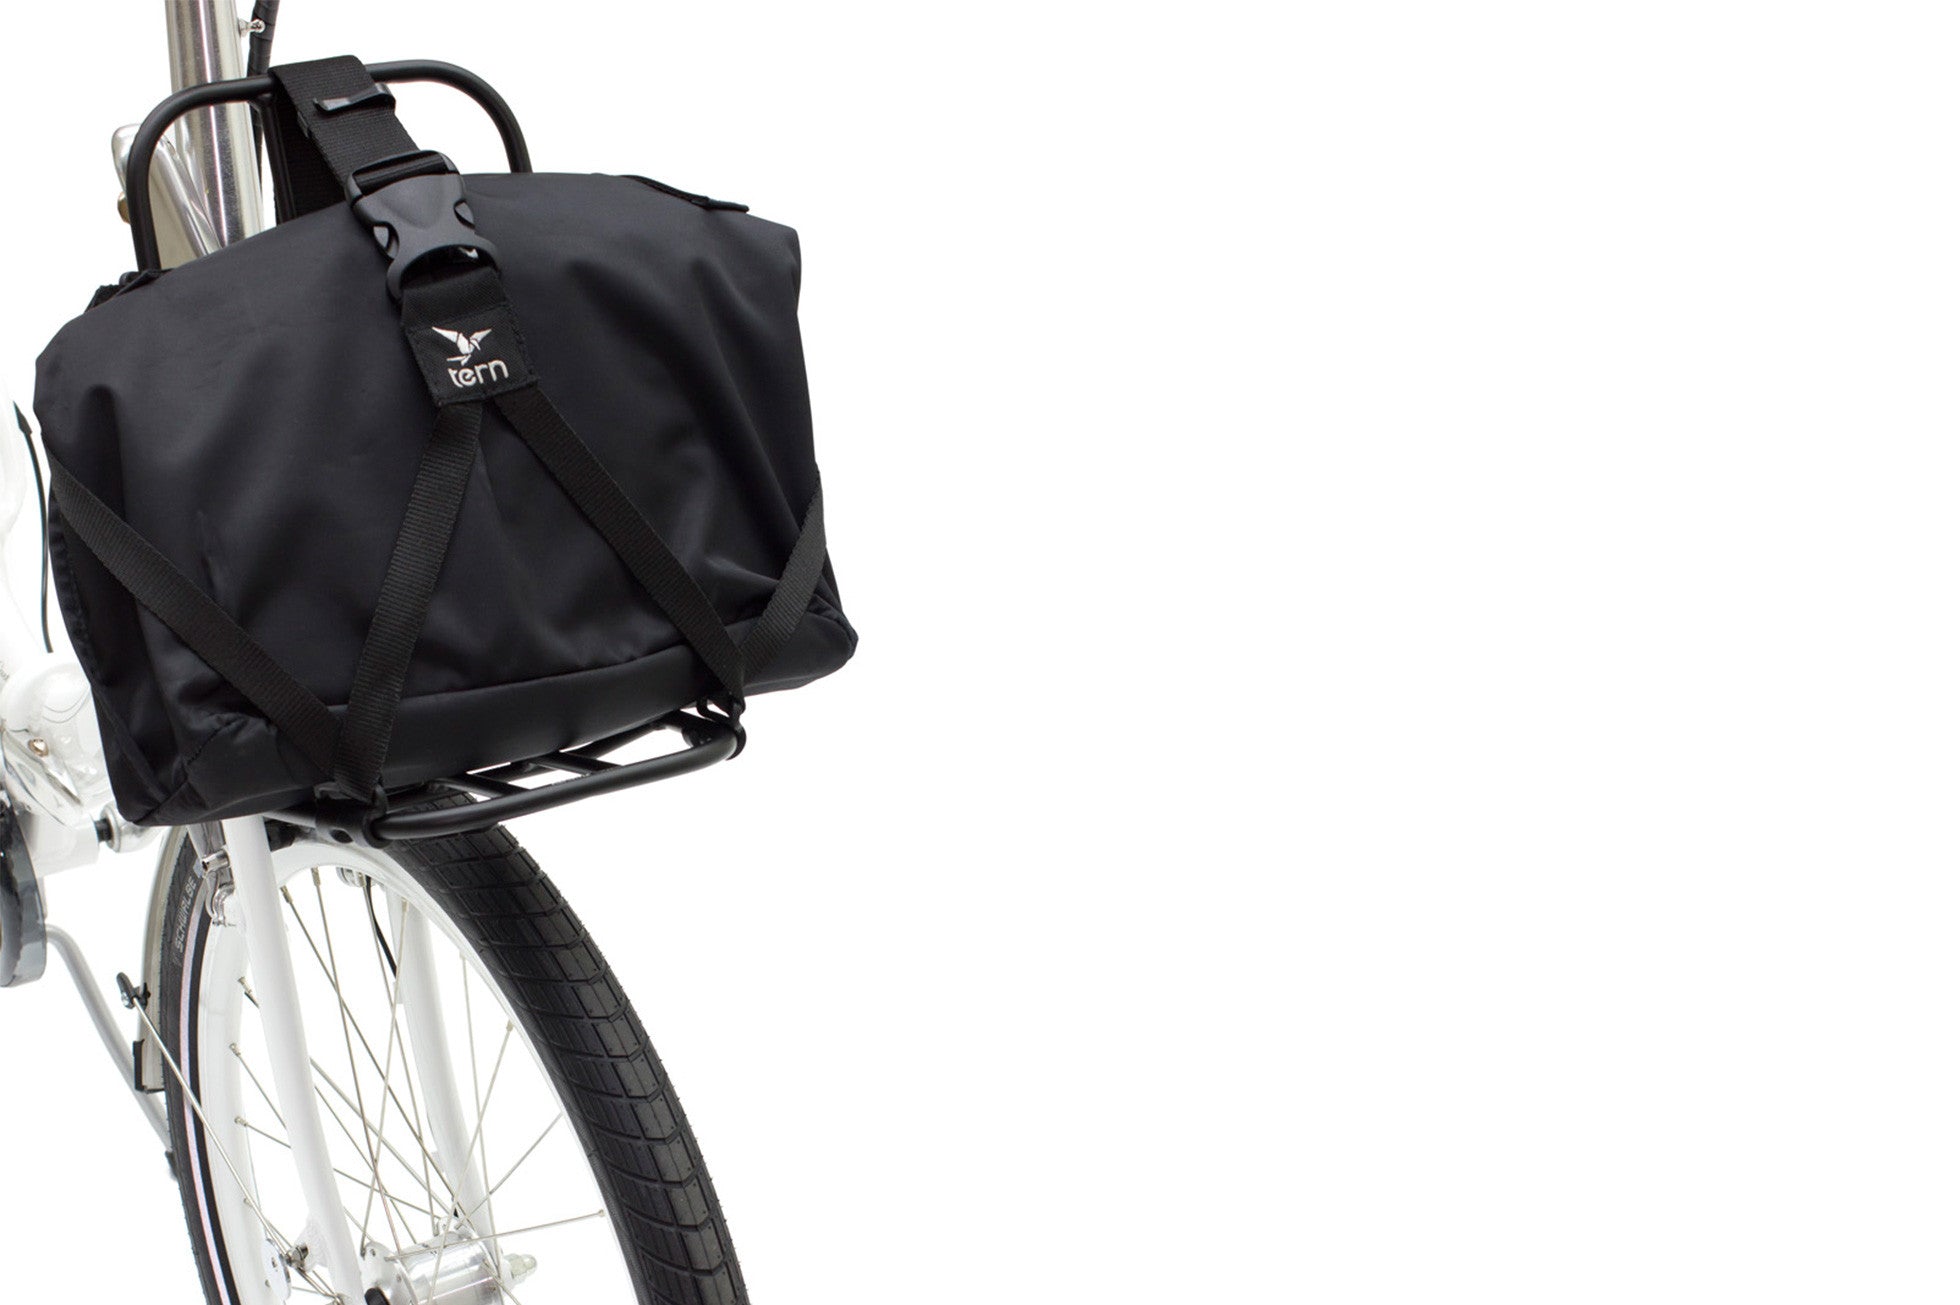 Tern Kanga Rack is a front-mount rack designed for your stuff